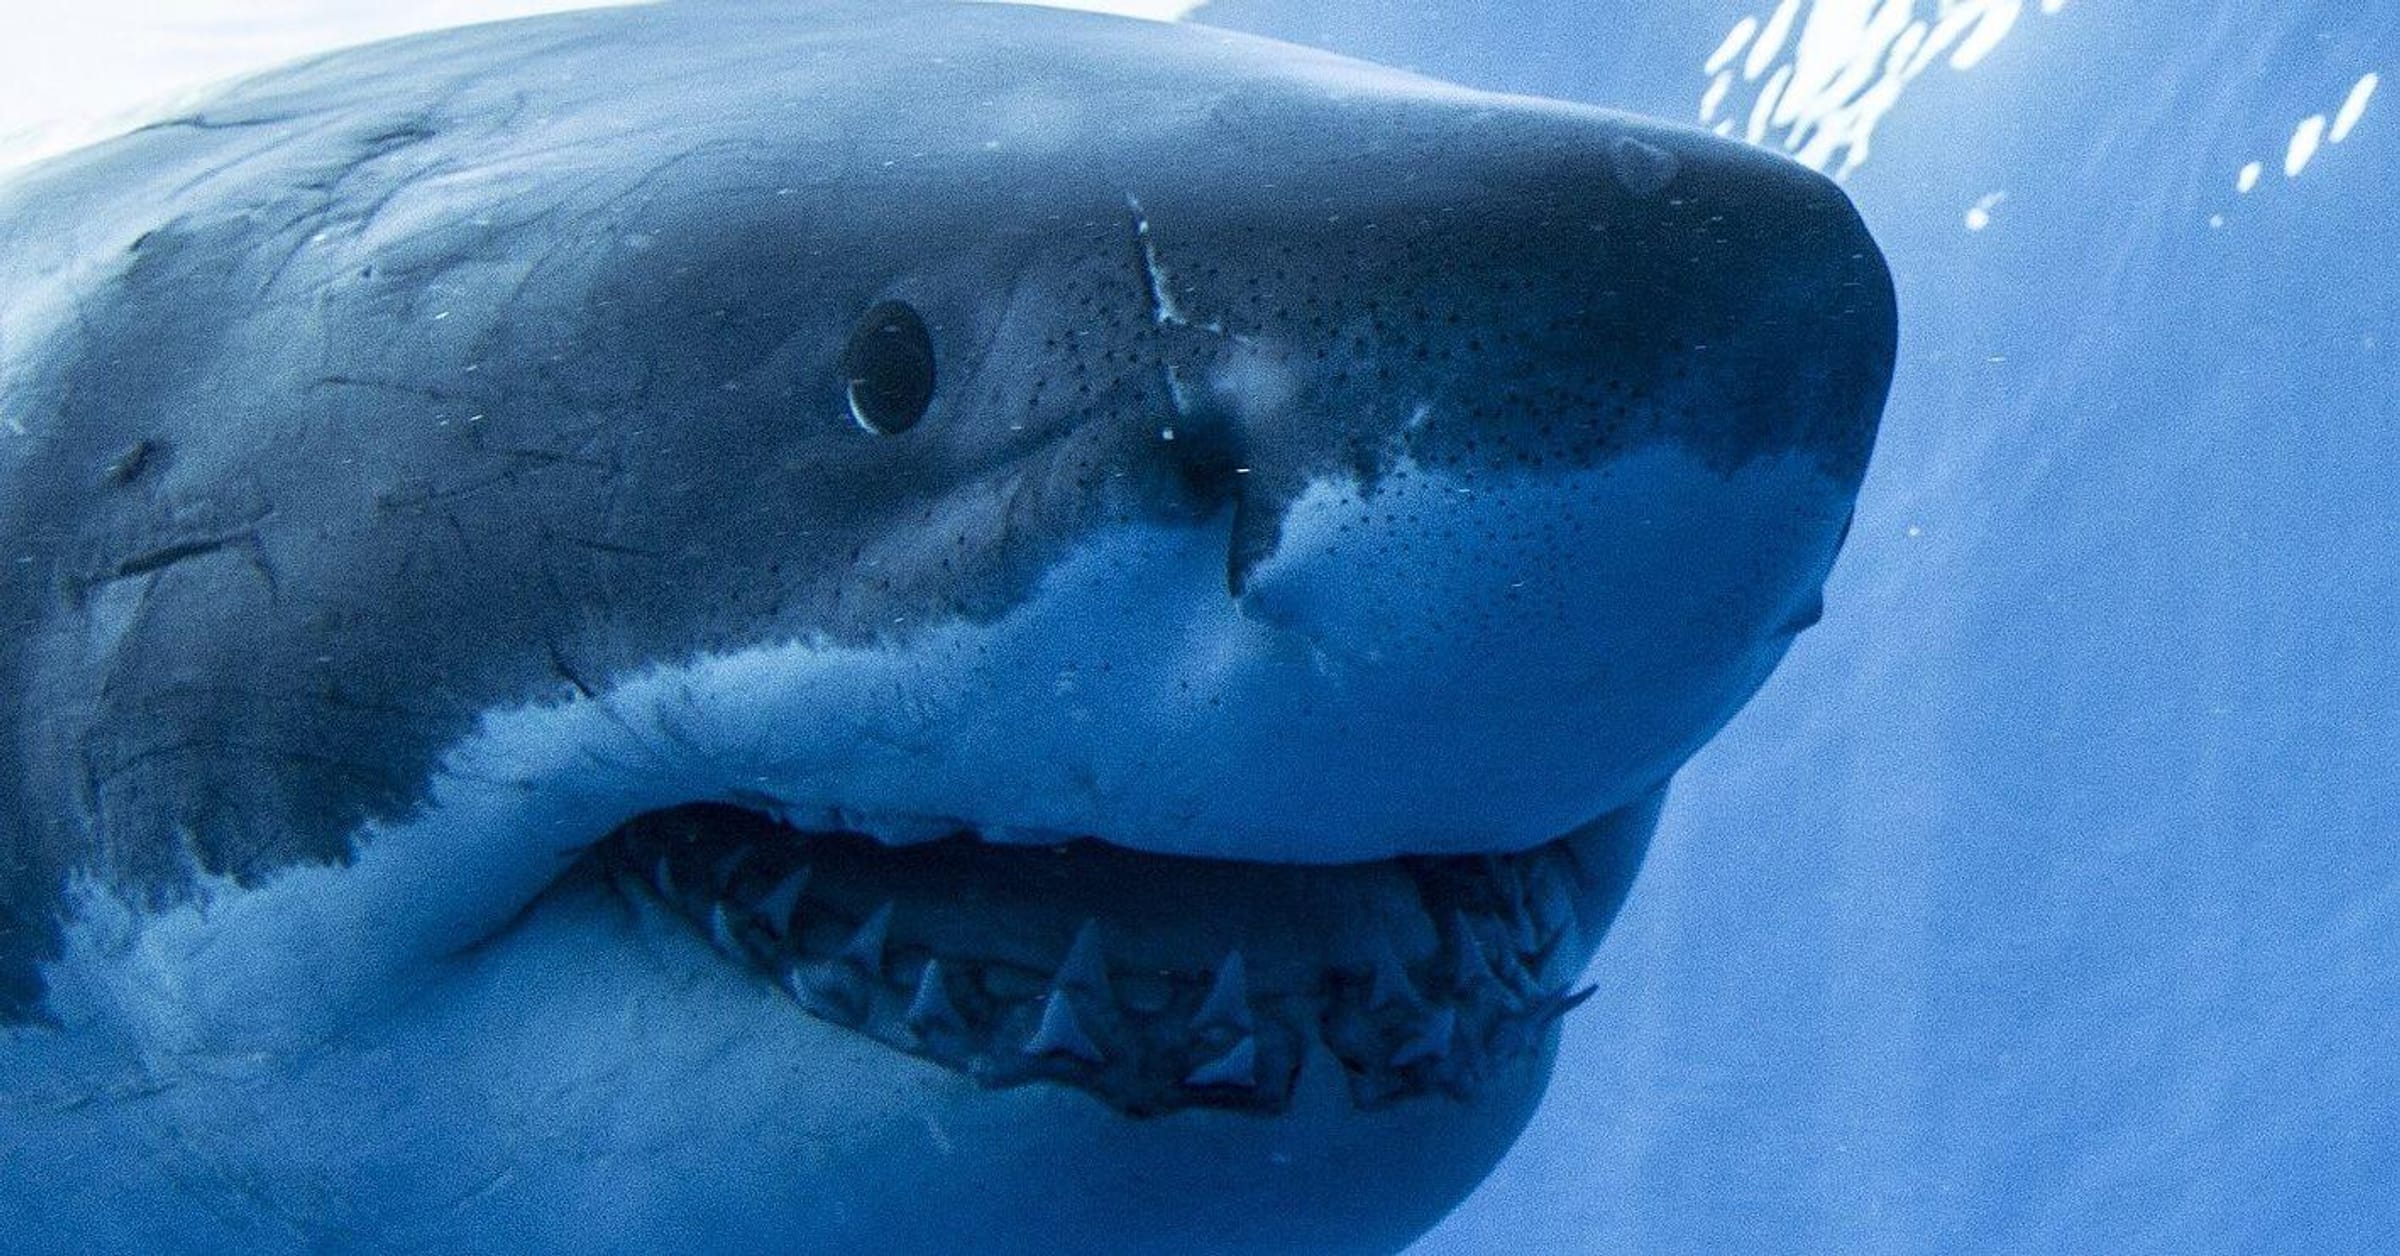 Shark Attacks: Pictures, Information About Sharks